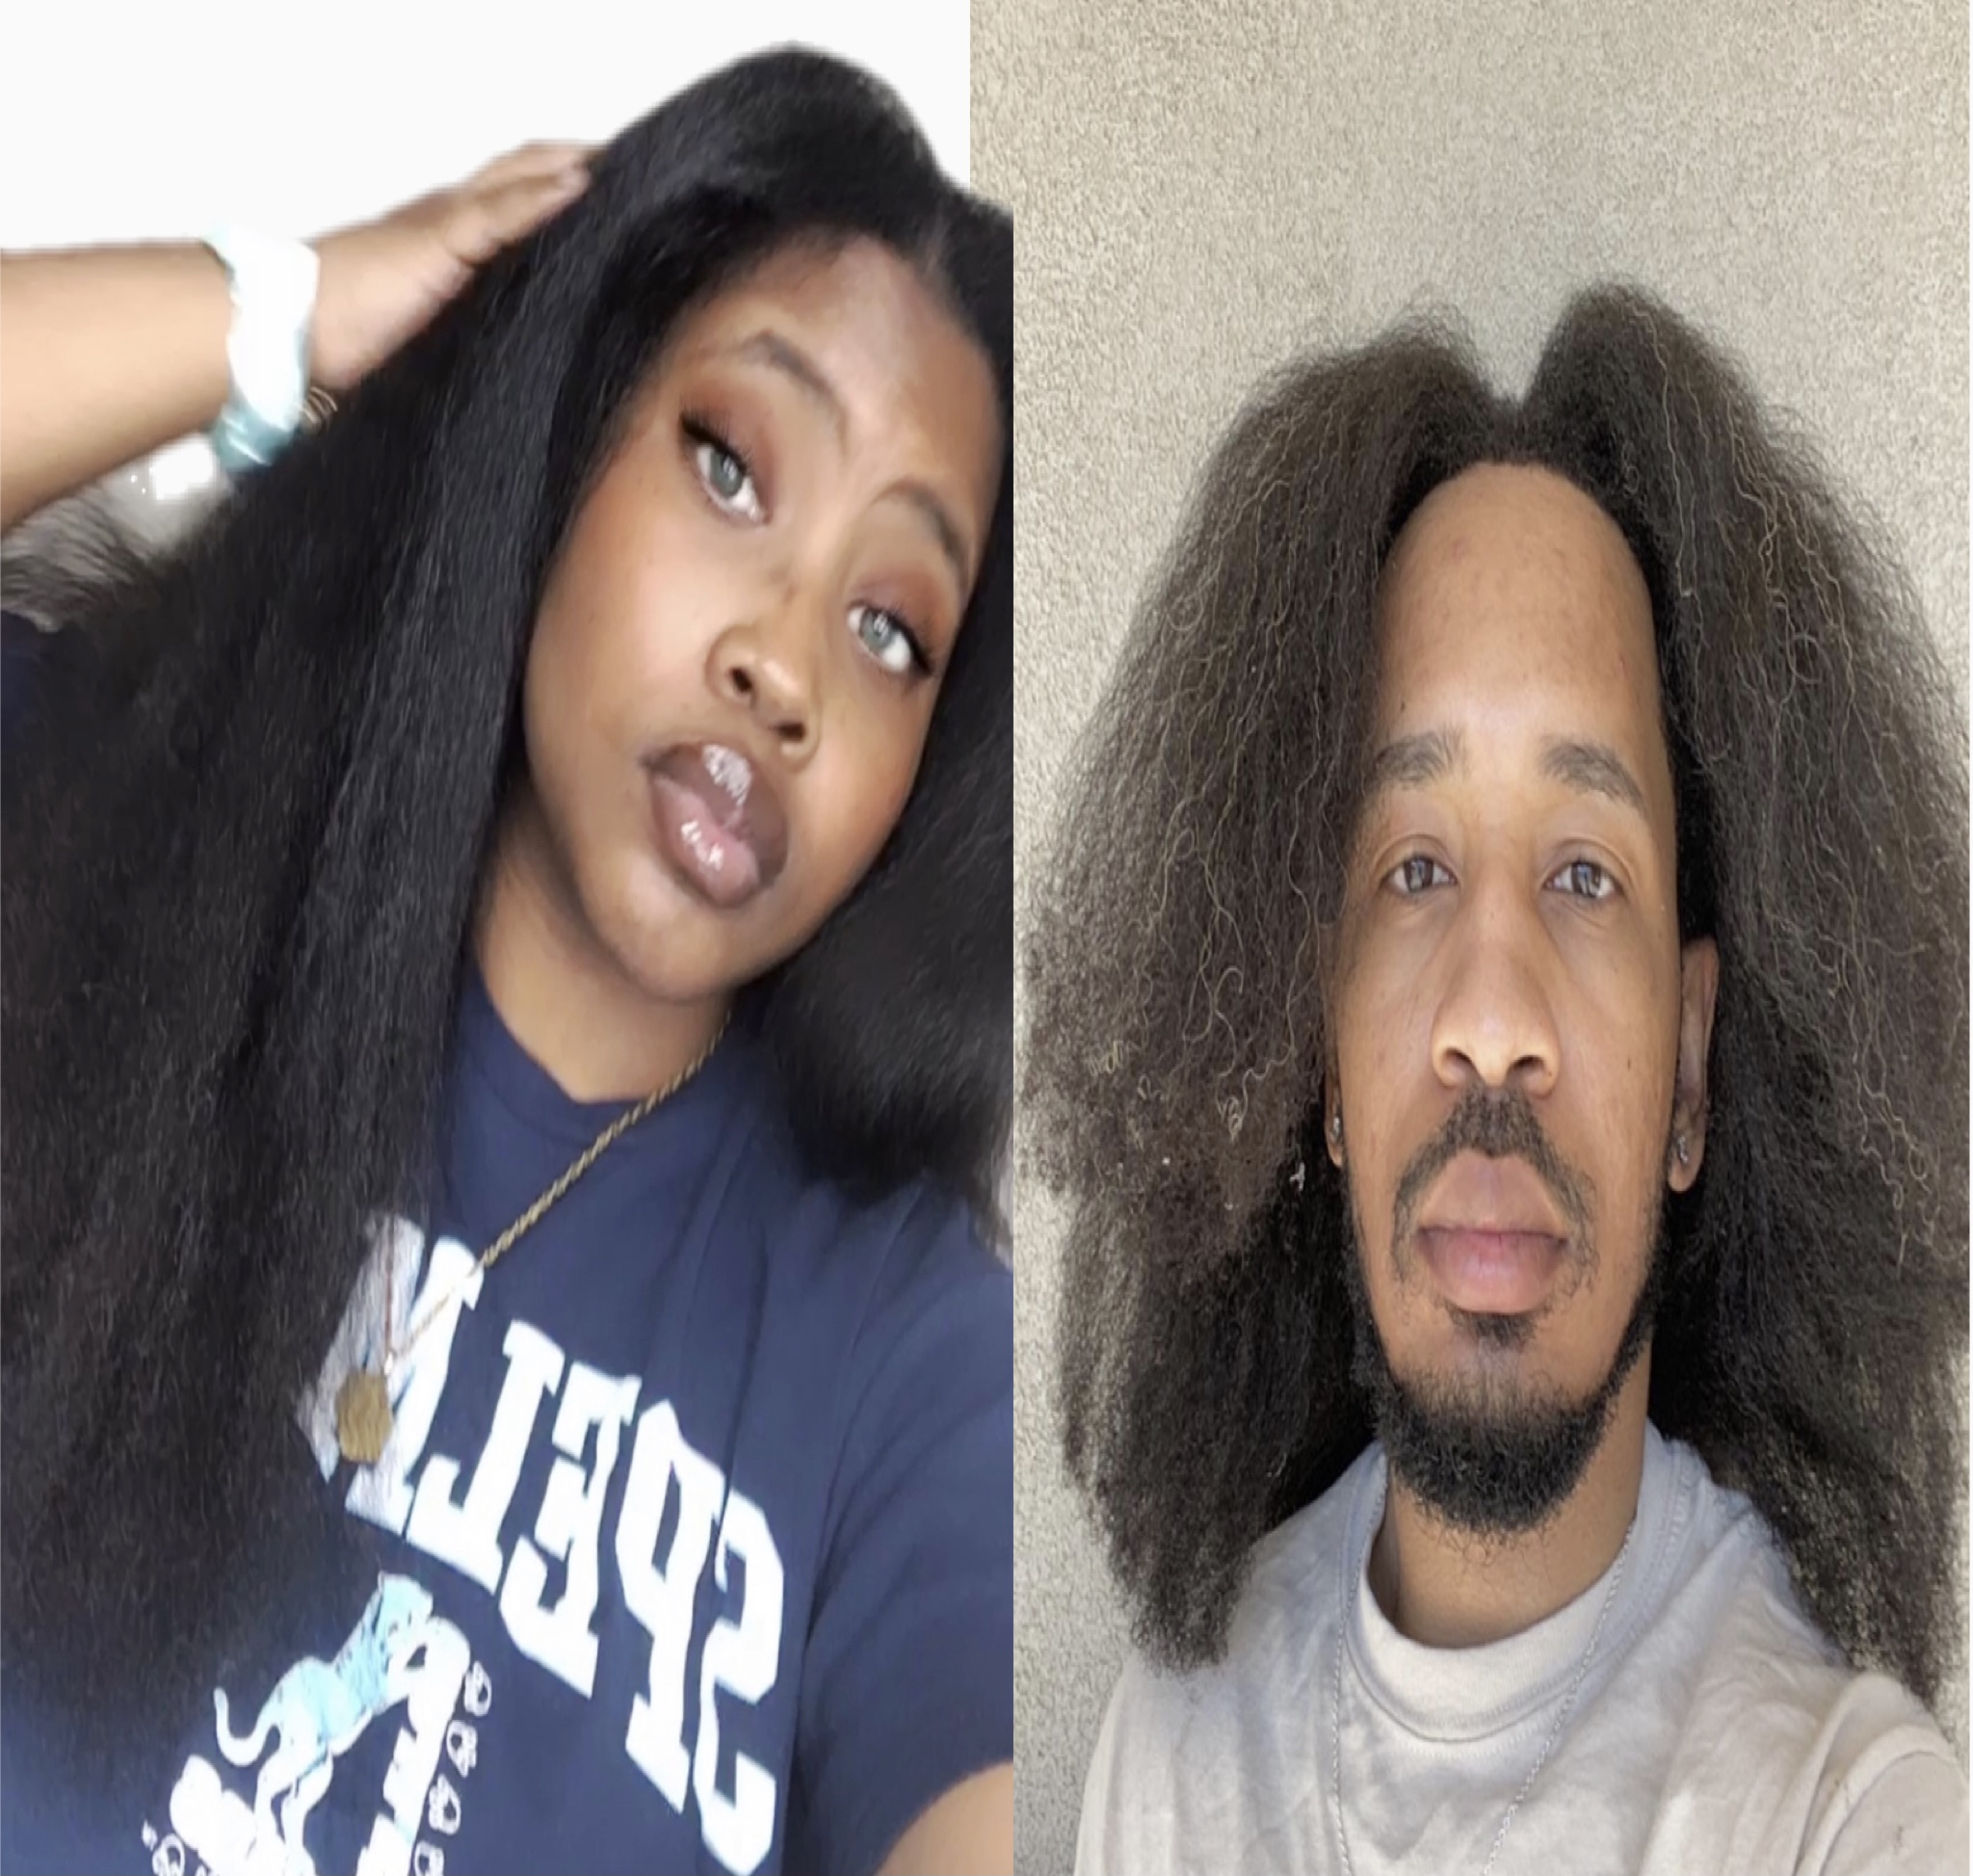 YouTube channel ReggieUncut to teach men and women about caring for natural hair